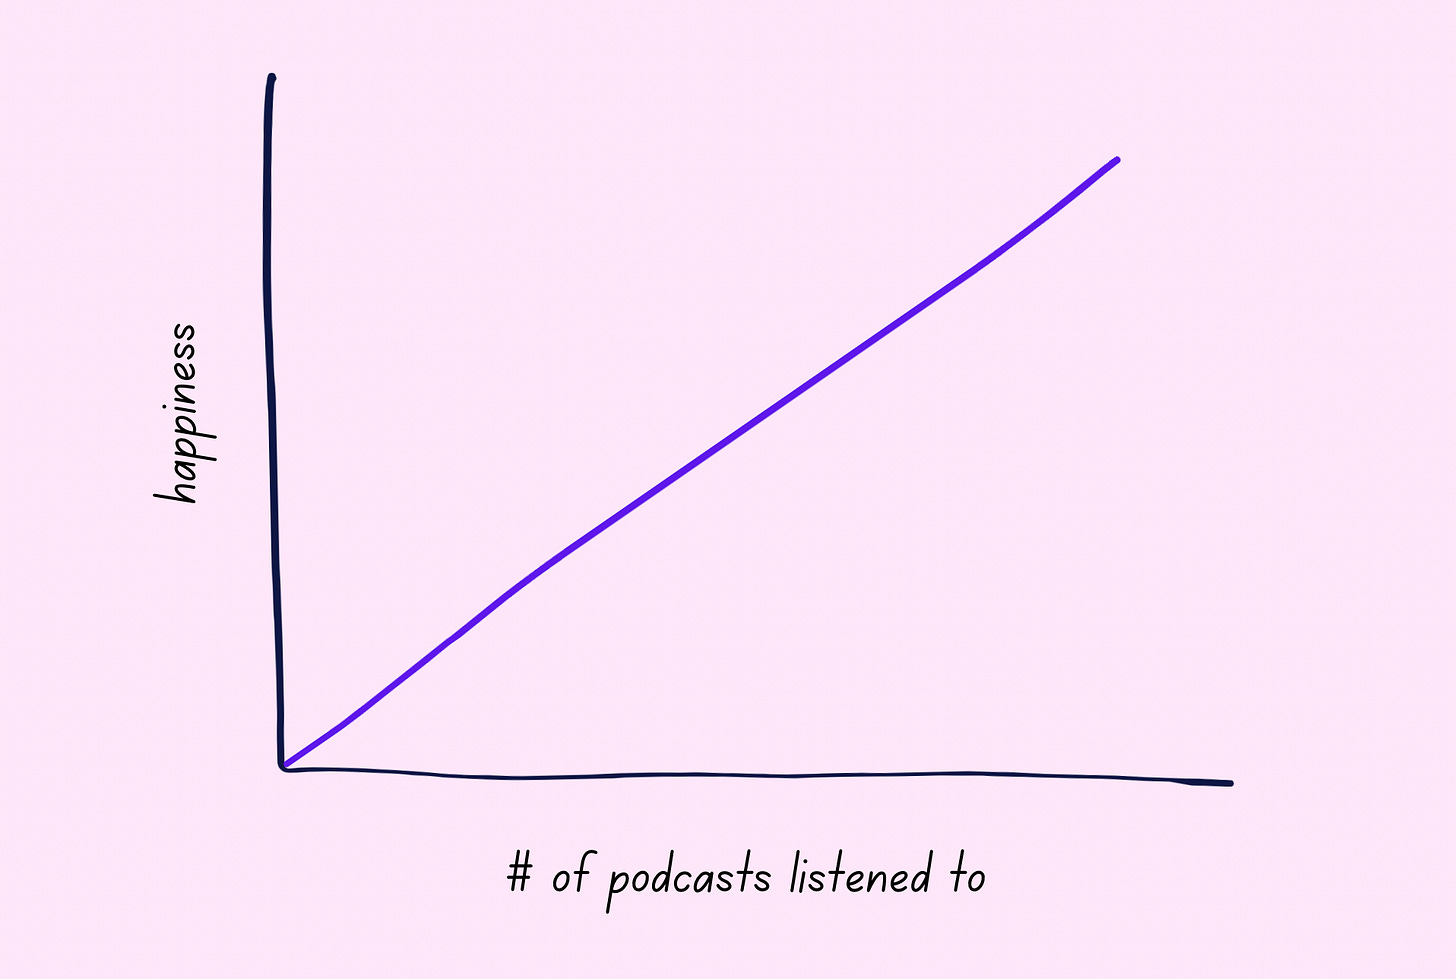 line graph showing happiness on the y axis and number of podcasts listened to on the x axis. The line shows an increase in happiness as the number of podcasts increases.